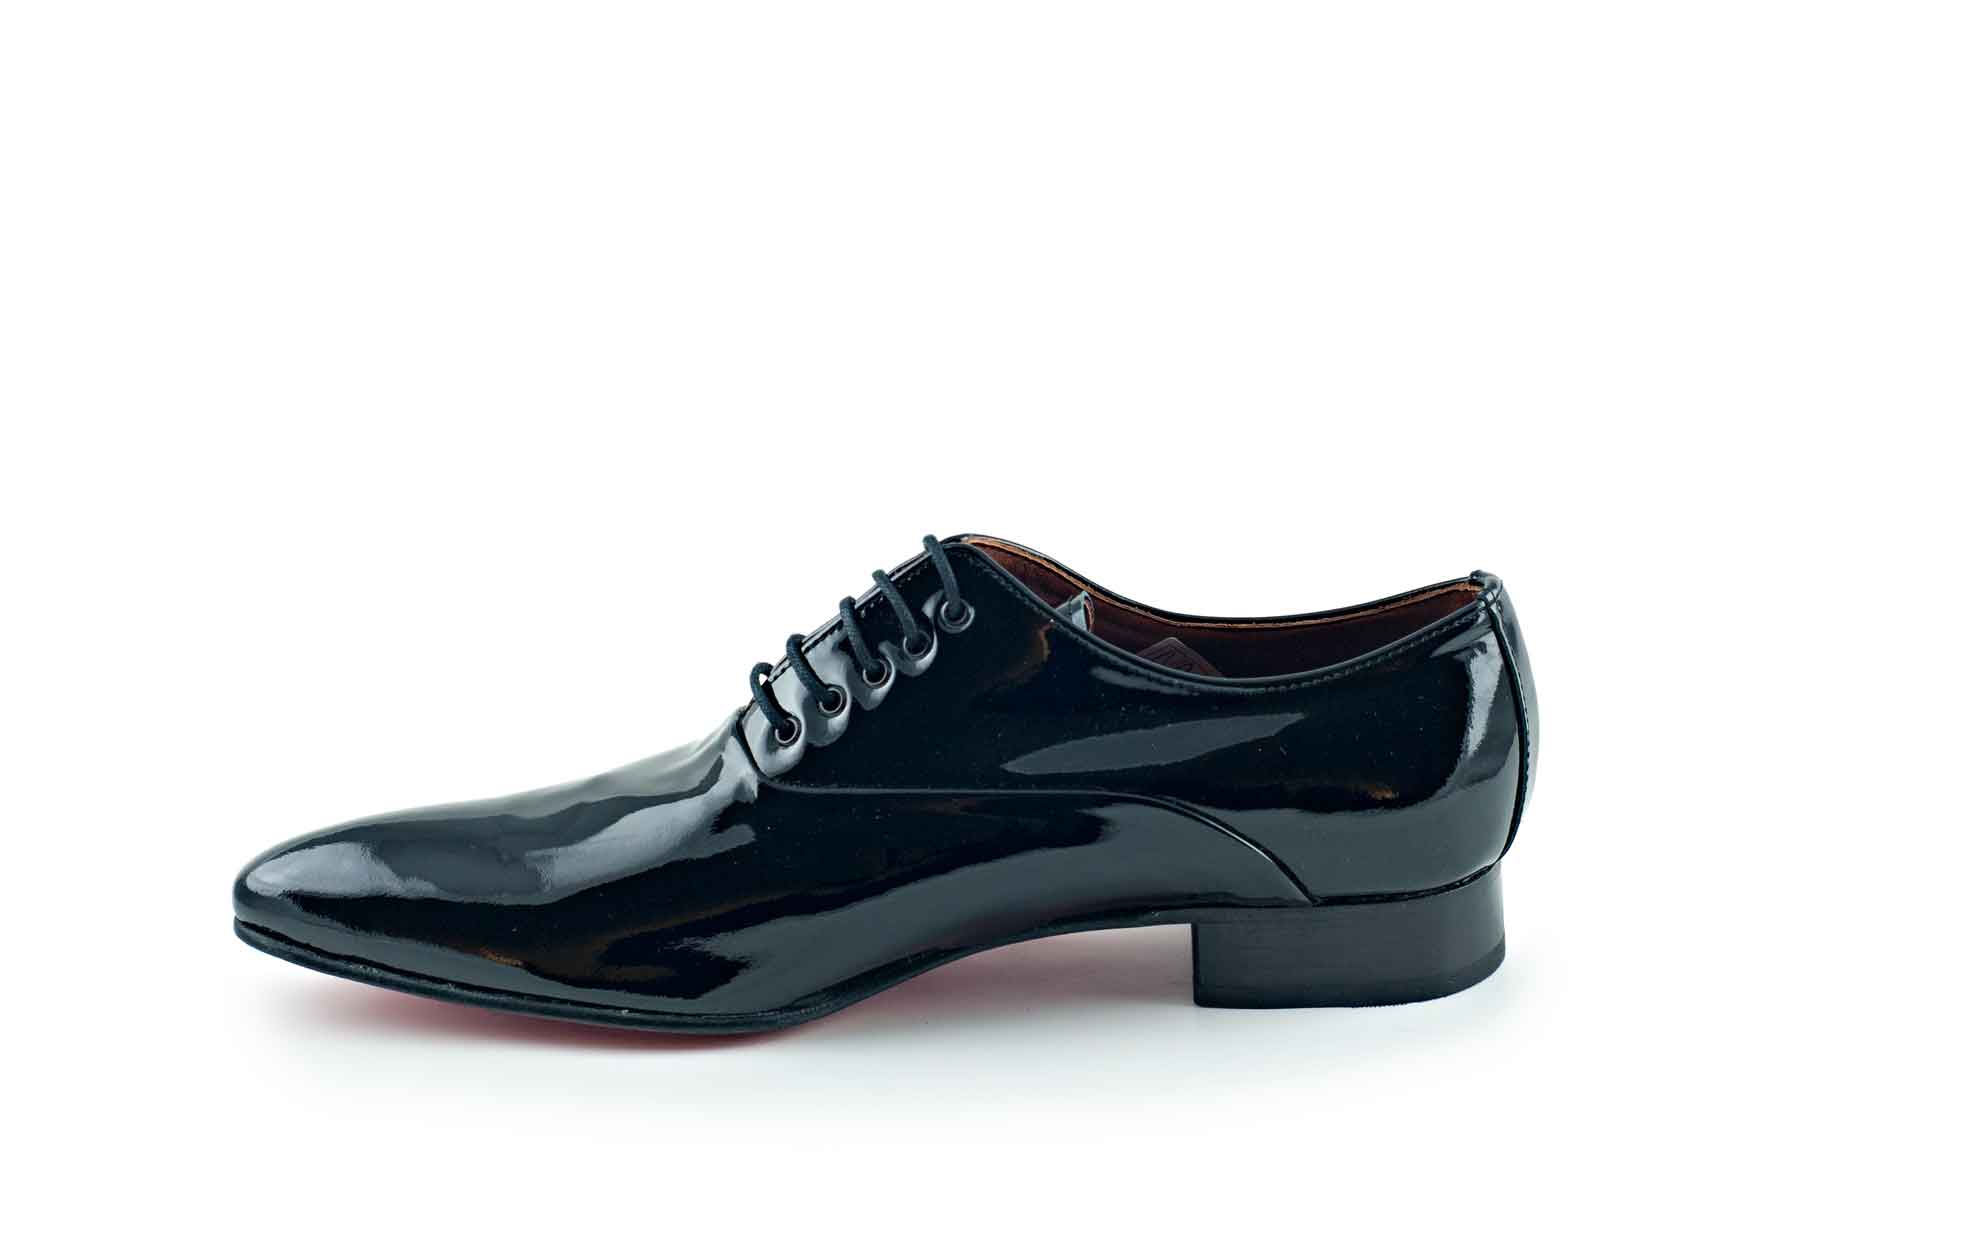 Sinatra Shoe Manufactured In Black Patent Leather